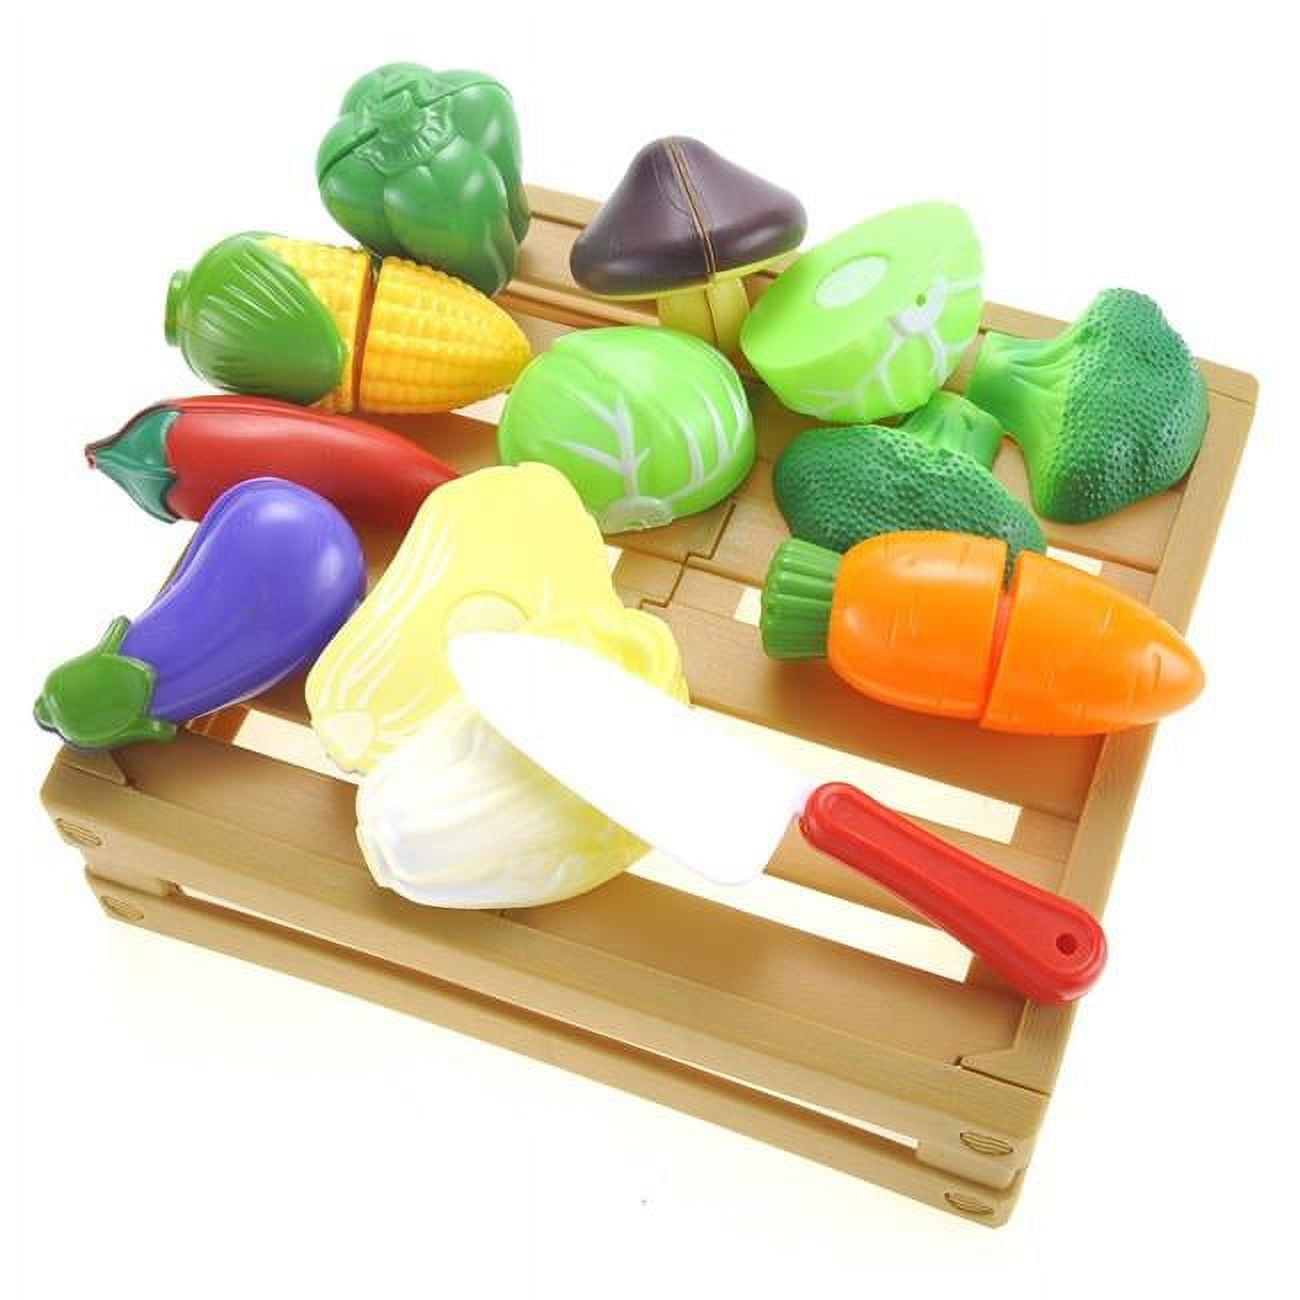 Picture of Azimport PS237 Kitchen Cutting Vegetables Crate Pretend Food Play Set